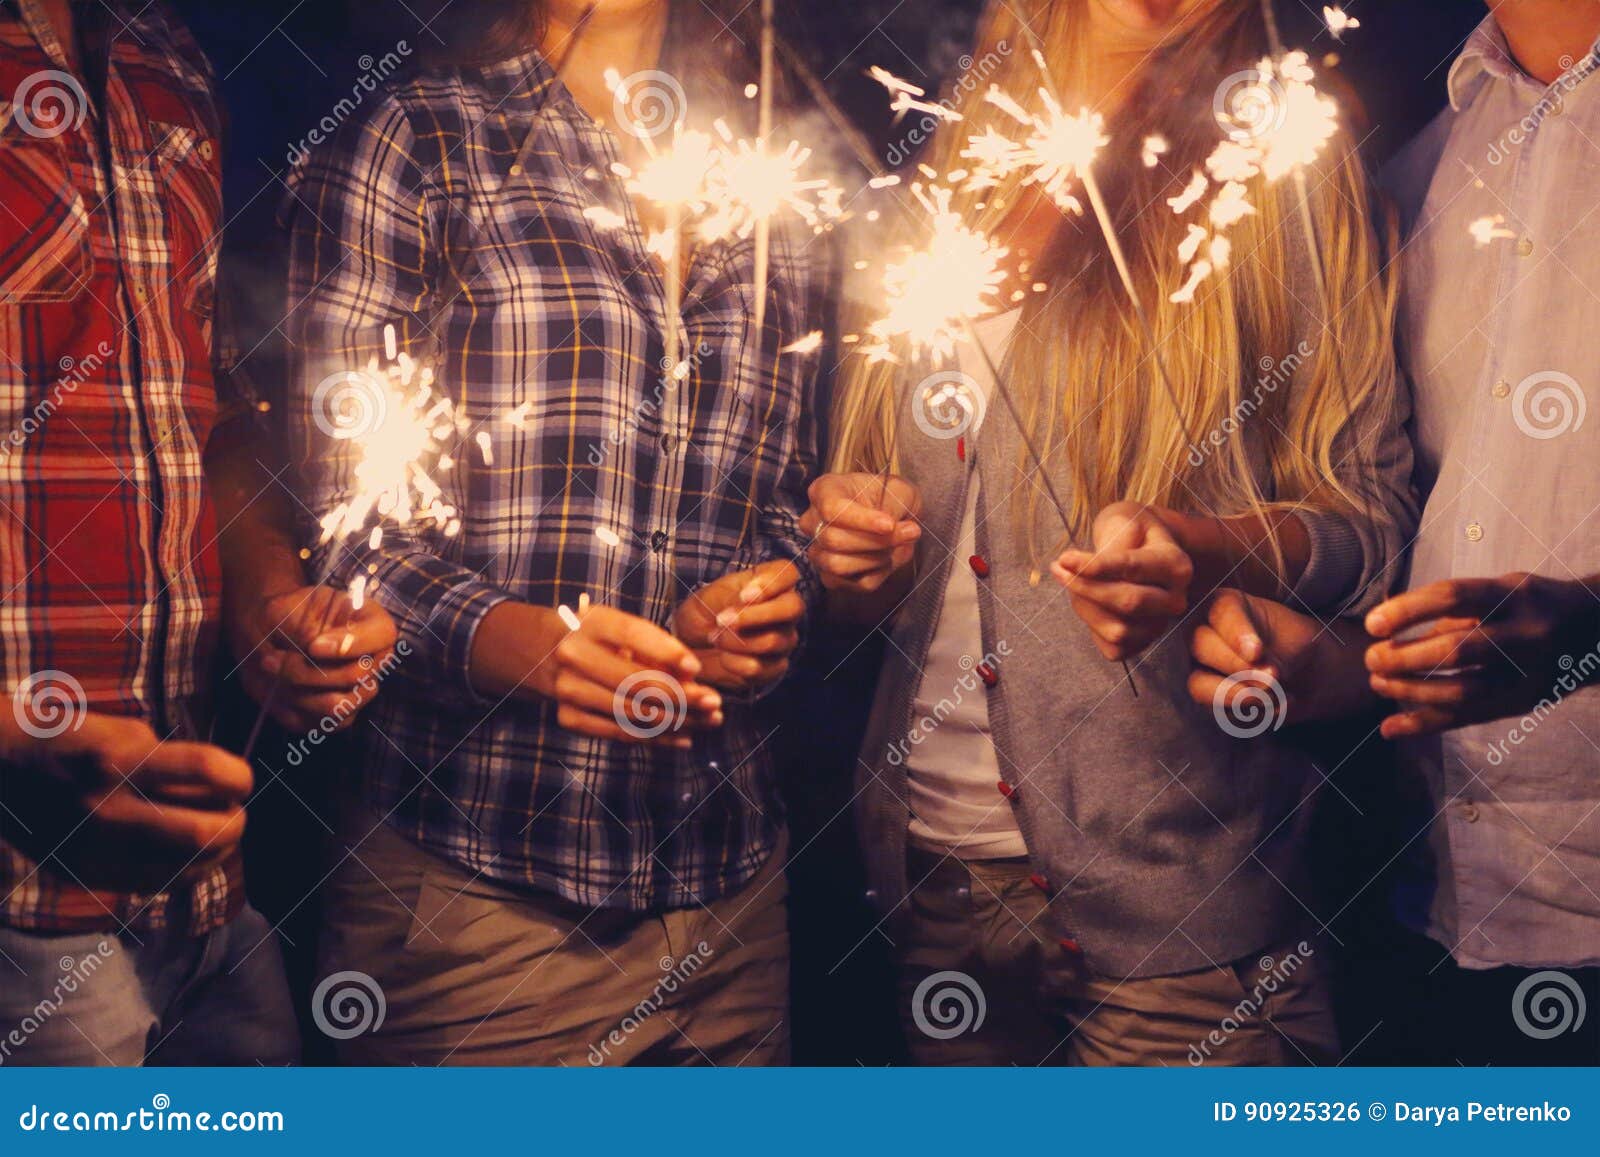 people with sparklers on outdoor party